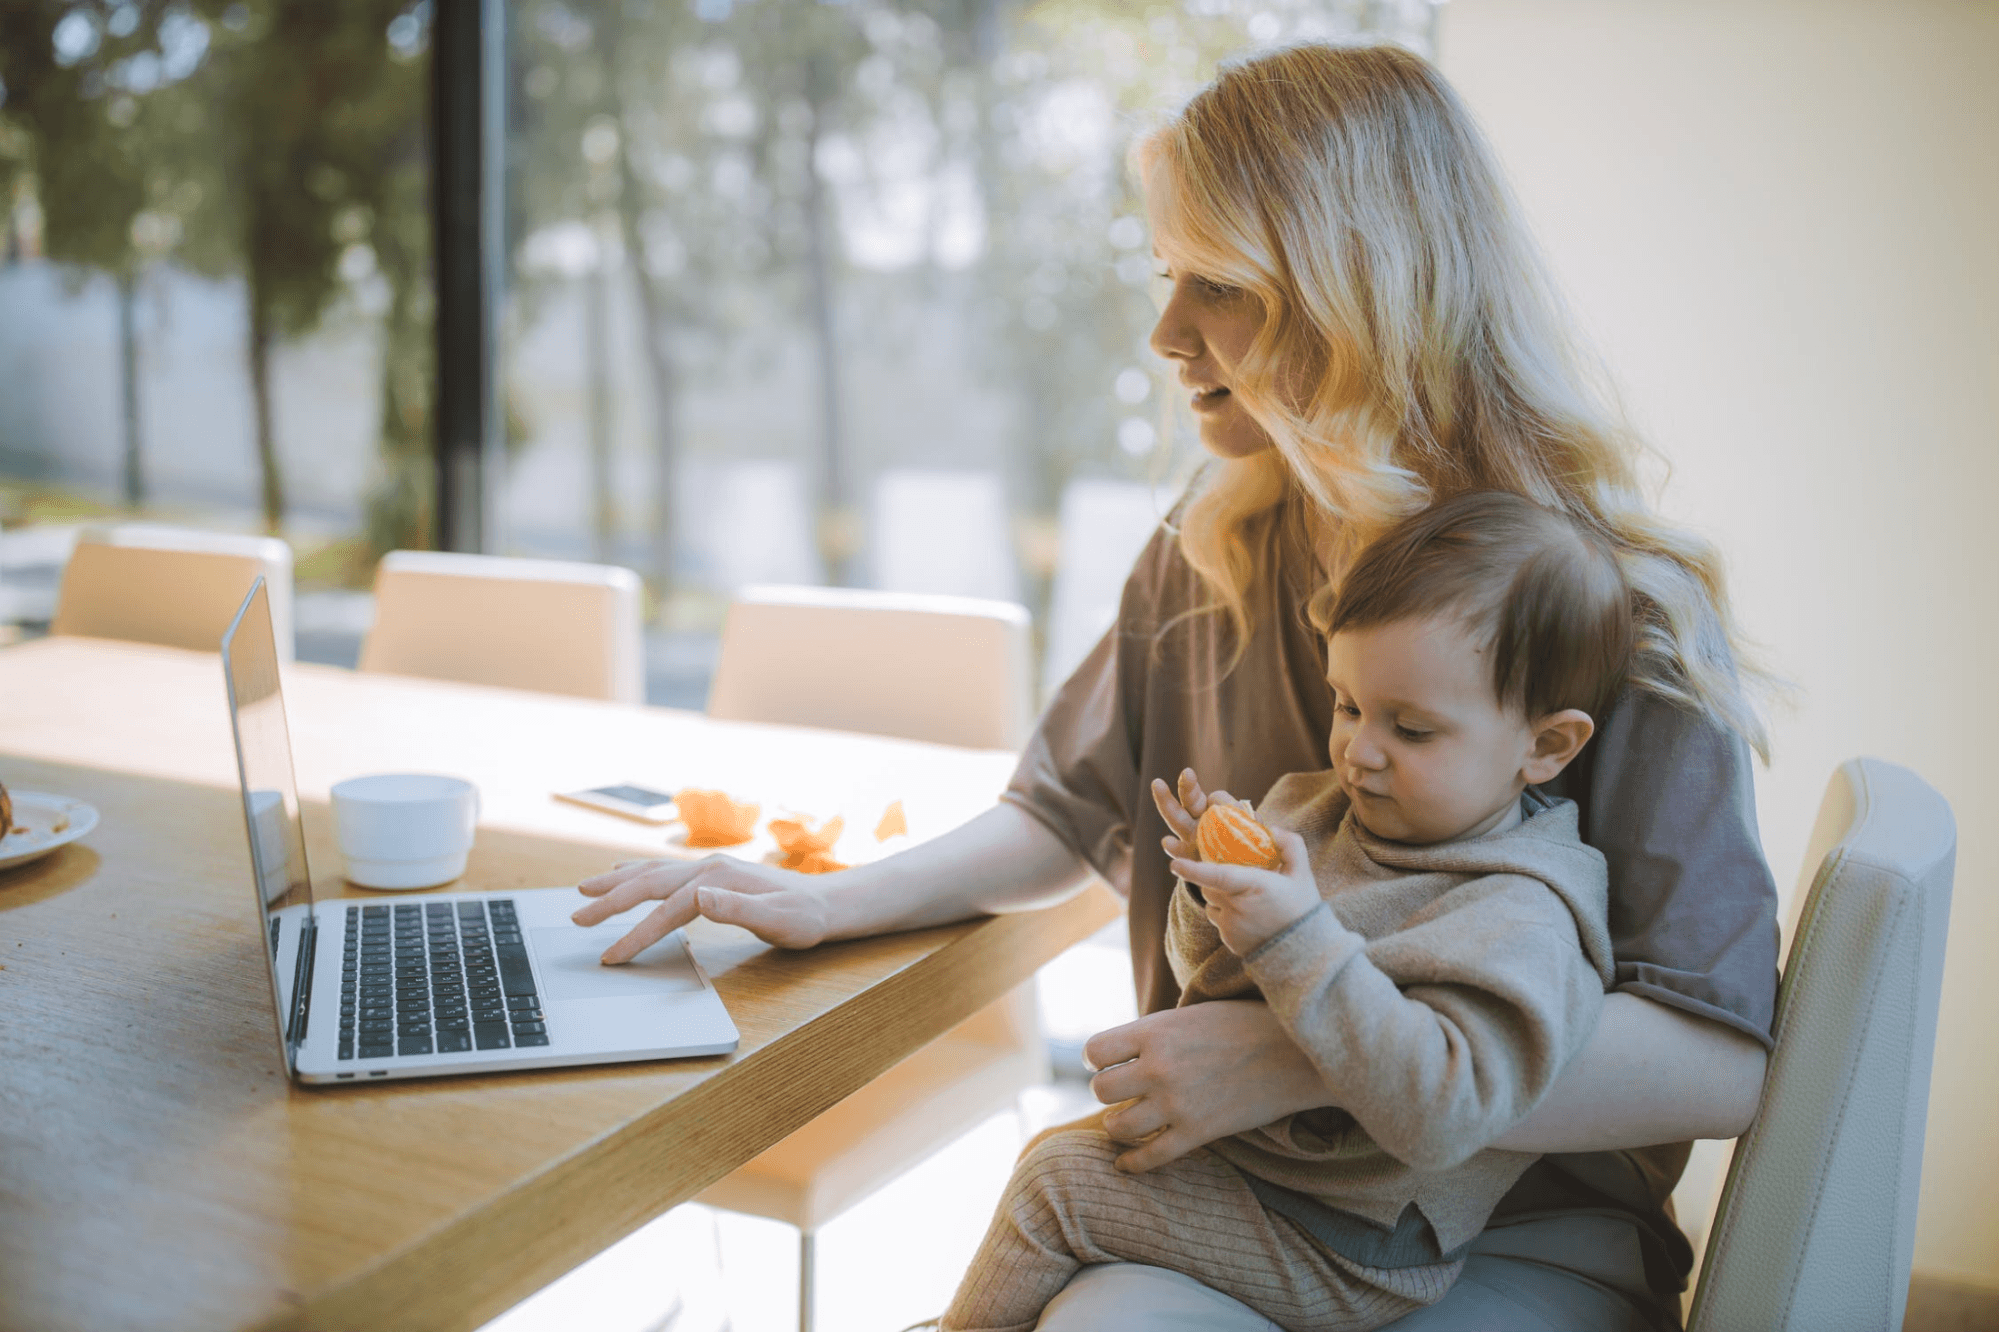 A person is sitting at a tan desk working on their laptop. They are holding their child and drinking a cup of coffee. The child is eating a peeled orange.